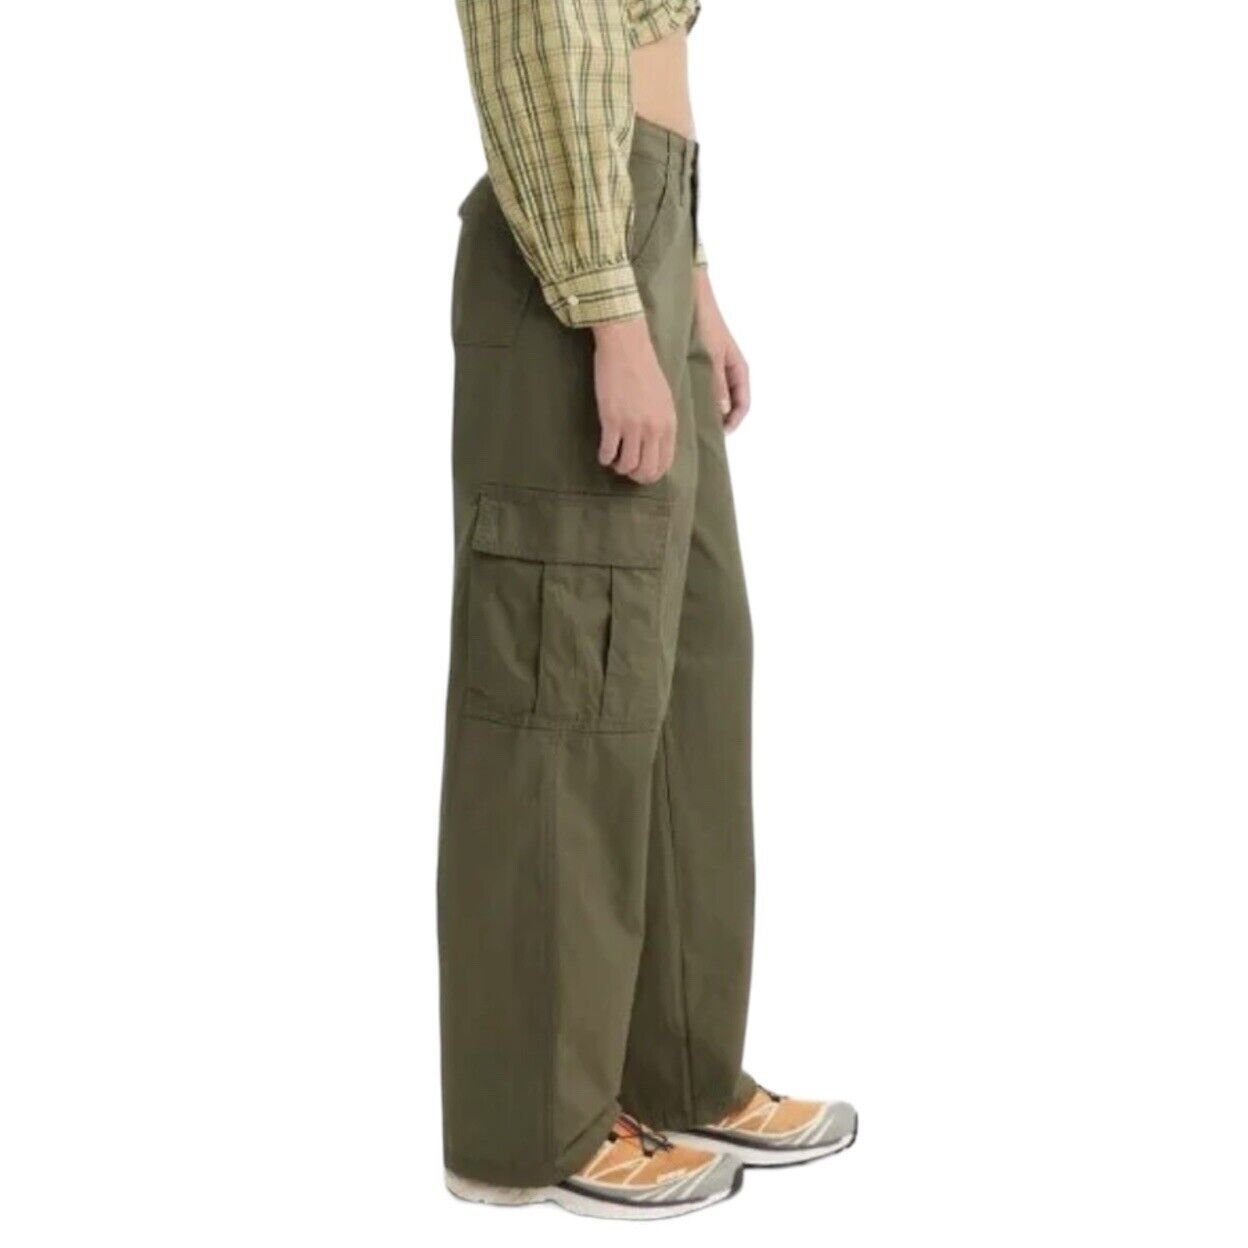 Affordable Levi´s Womens Mid-Rise 94´s Baggy Jeans Olive Green Cargo 100% Cotton Size 28x30 Fsmtht50k Zero Profit 